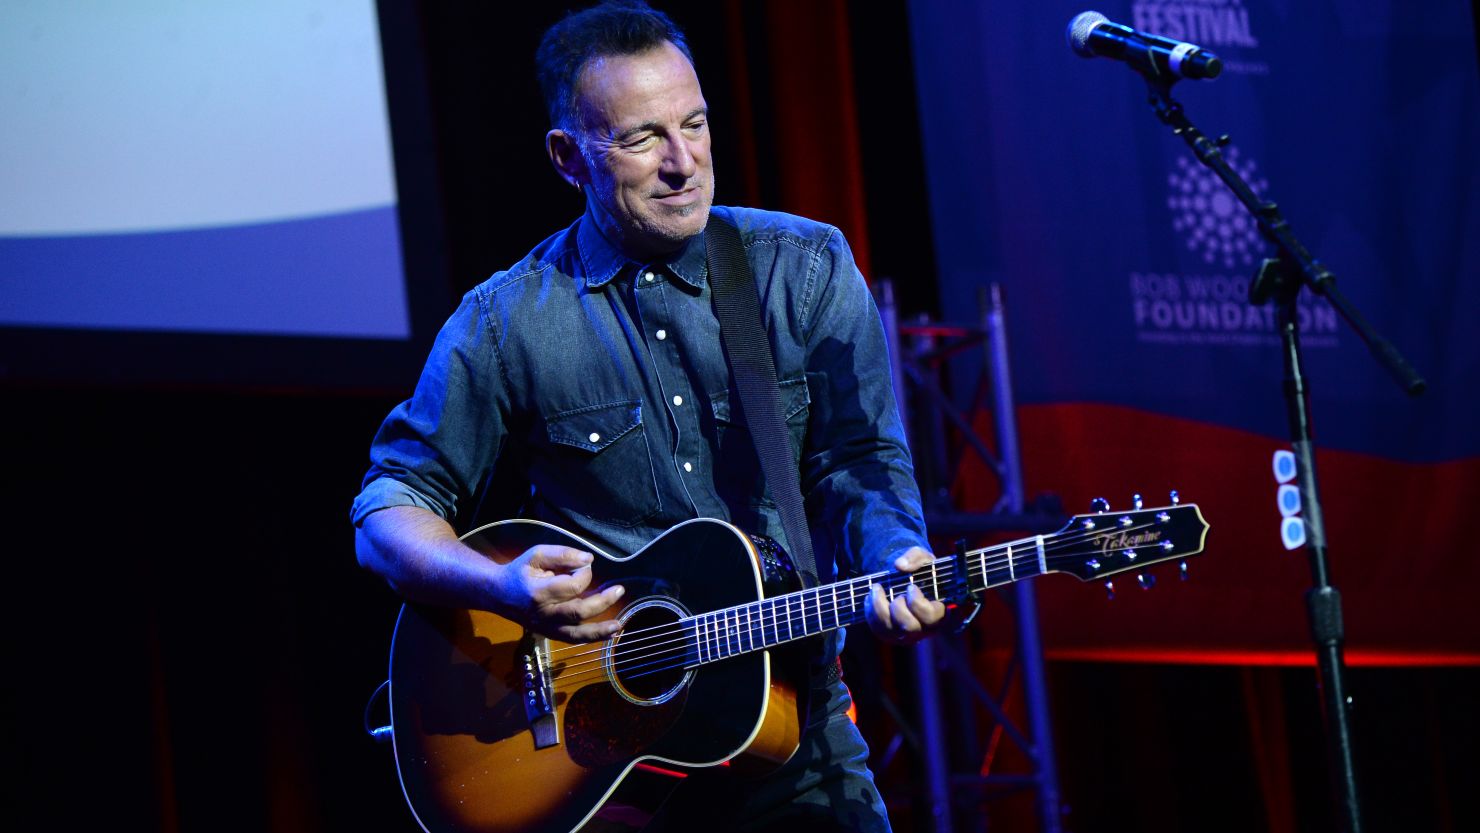 Bruce Springsteen is set to perform at Sunday's Tony Awards